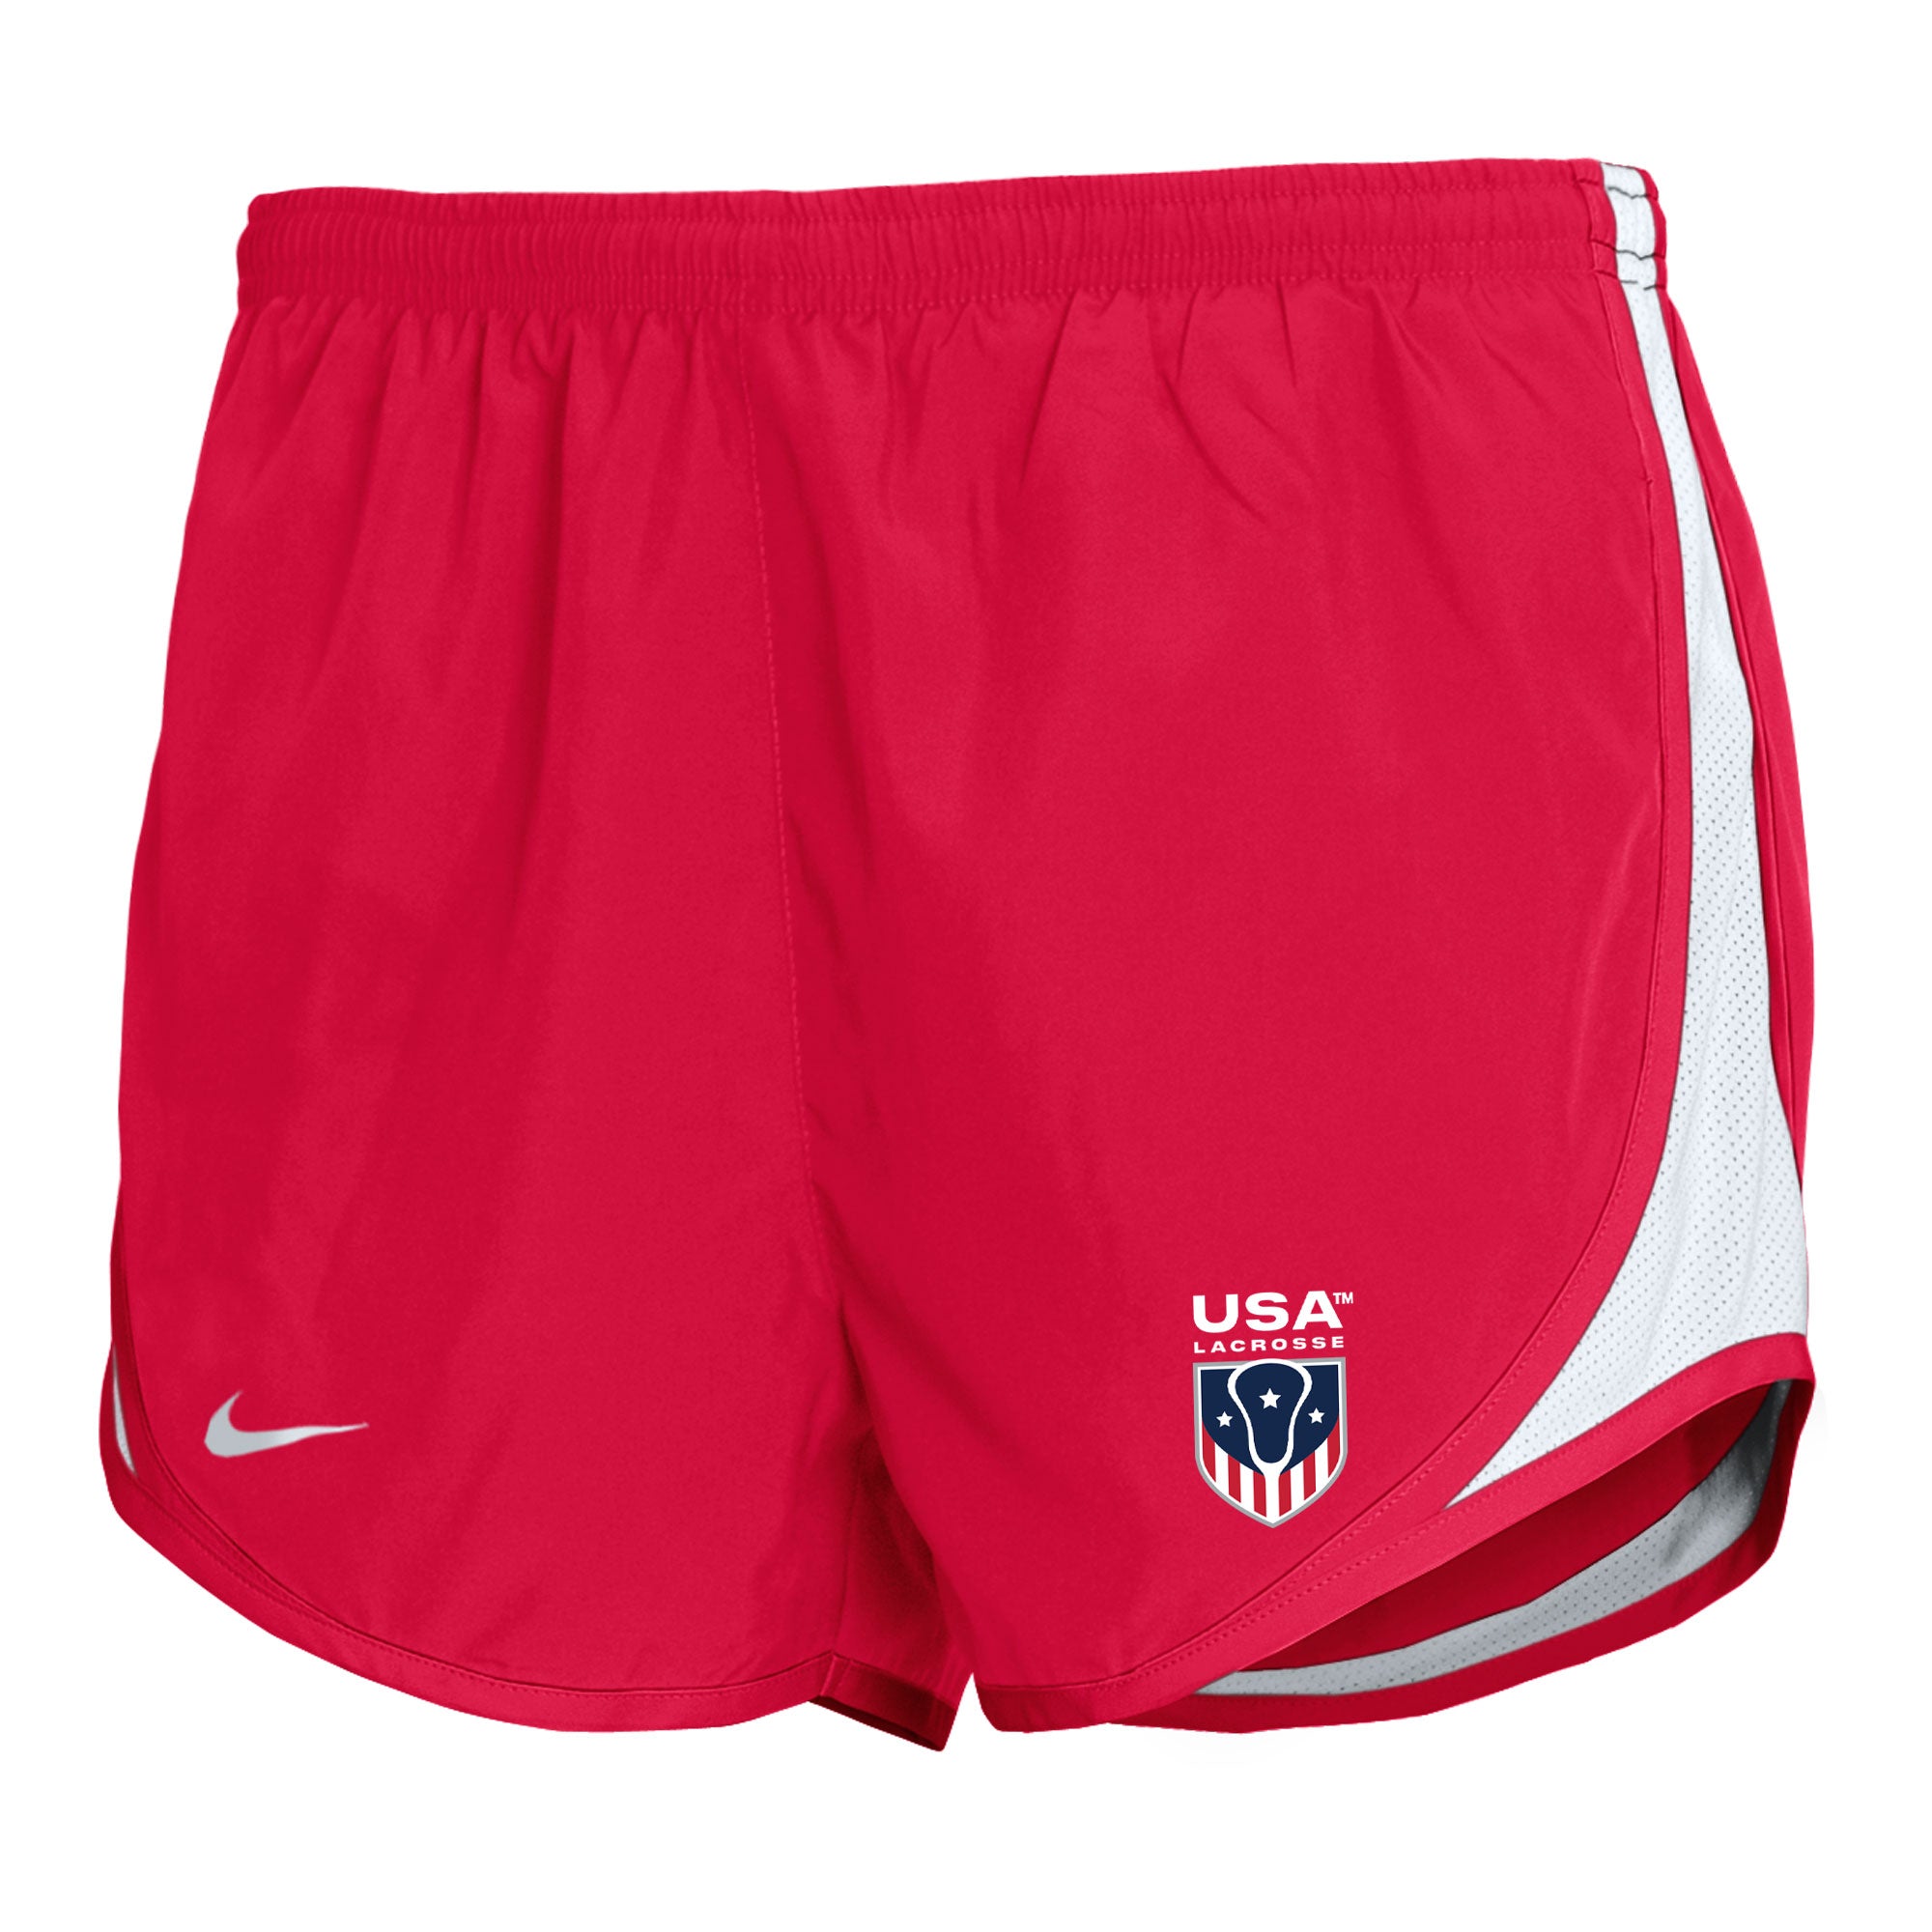 Youth Girl's USA Lacrosse Nike Tempo Shorts